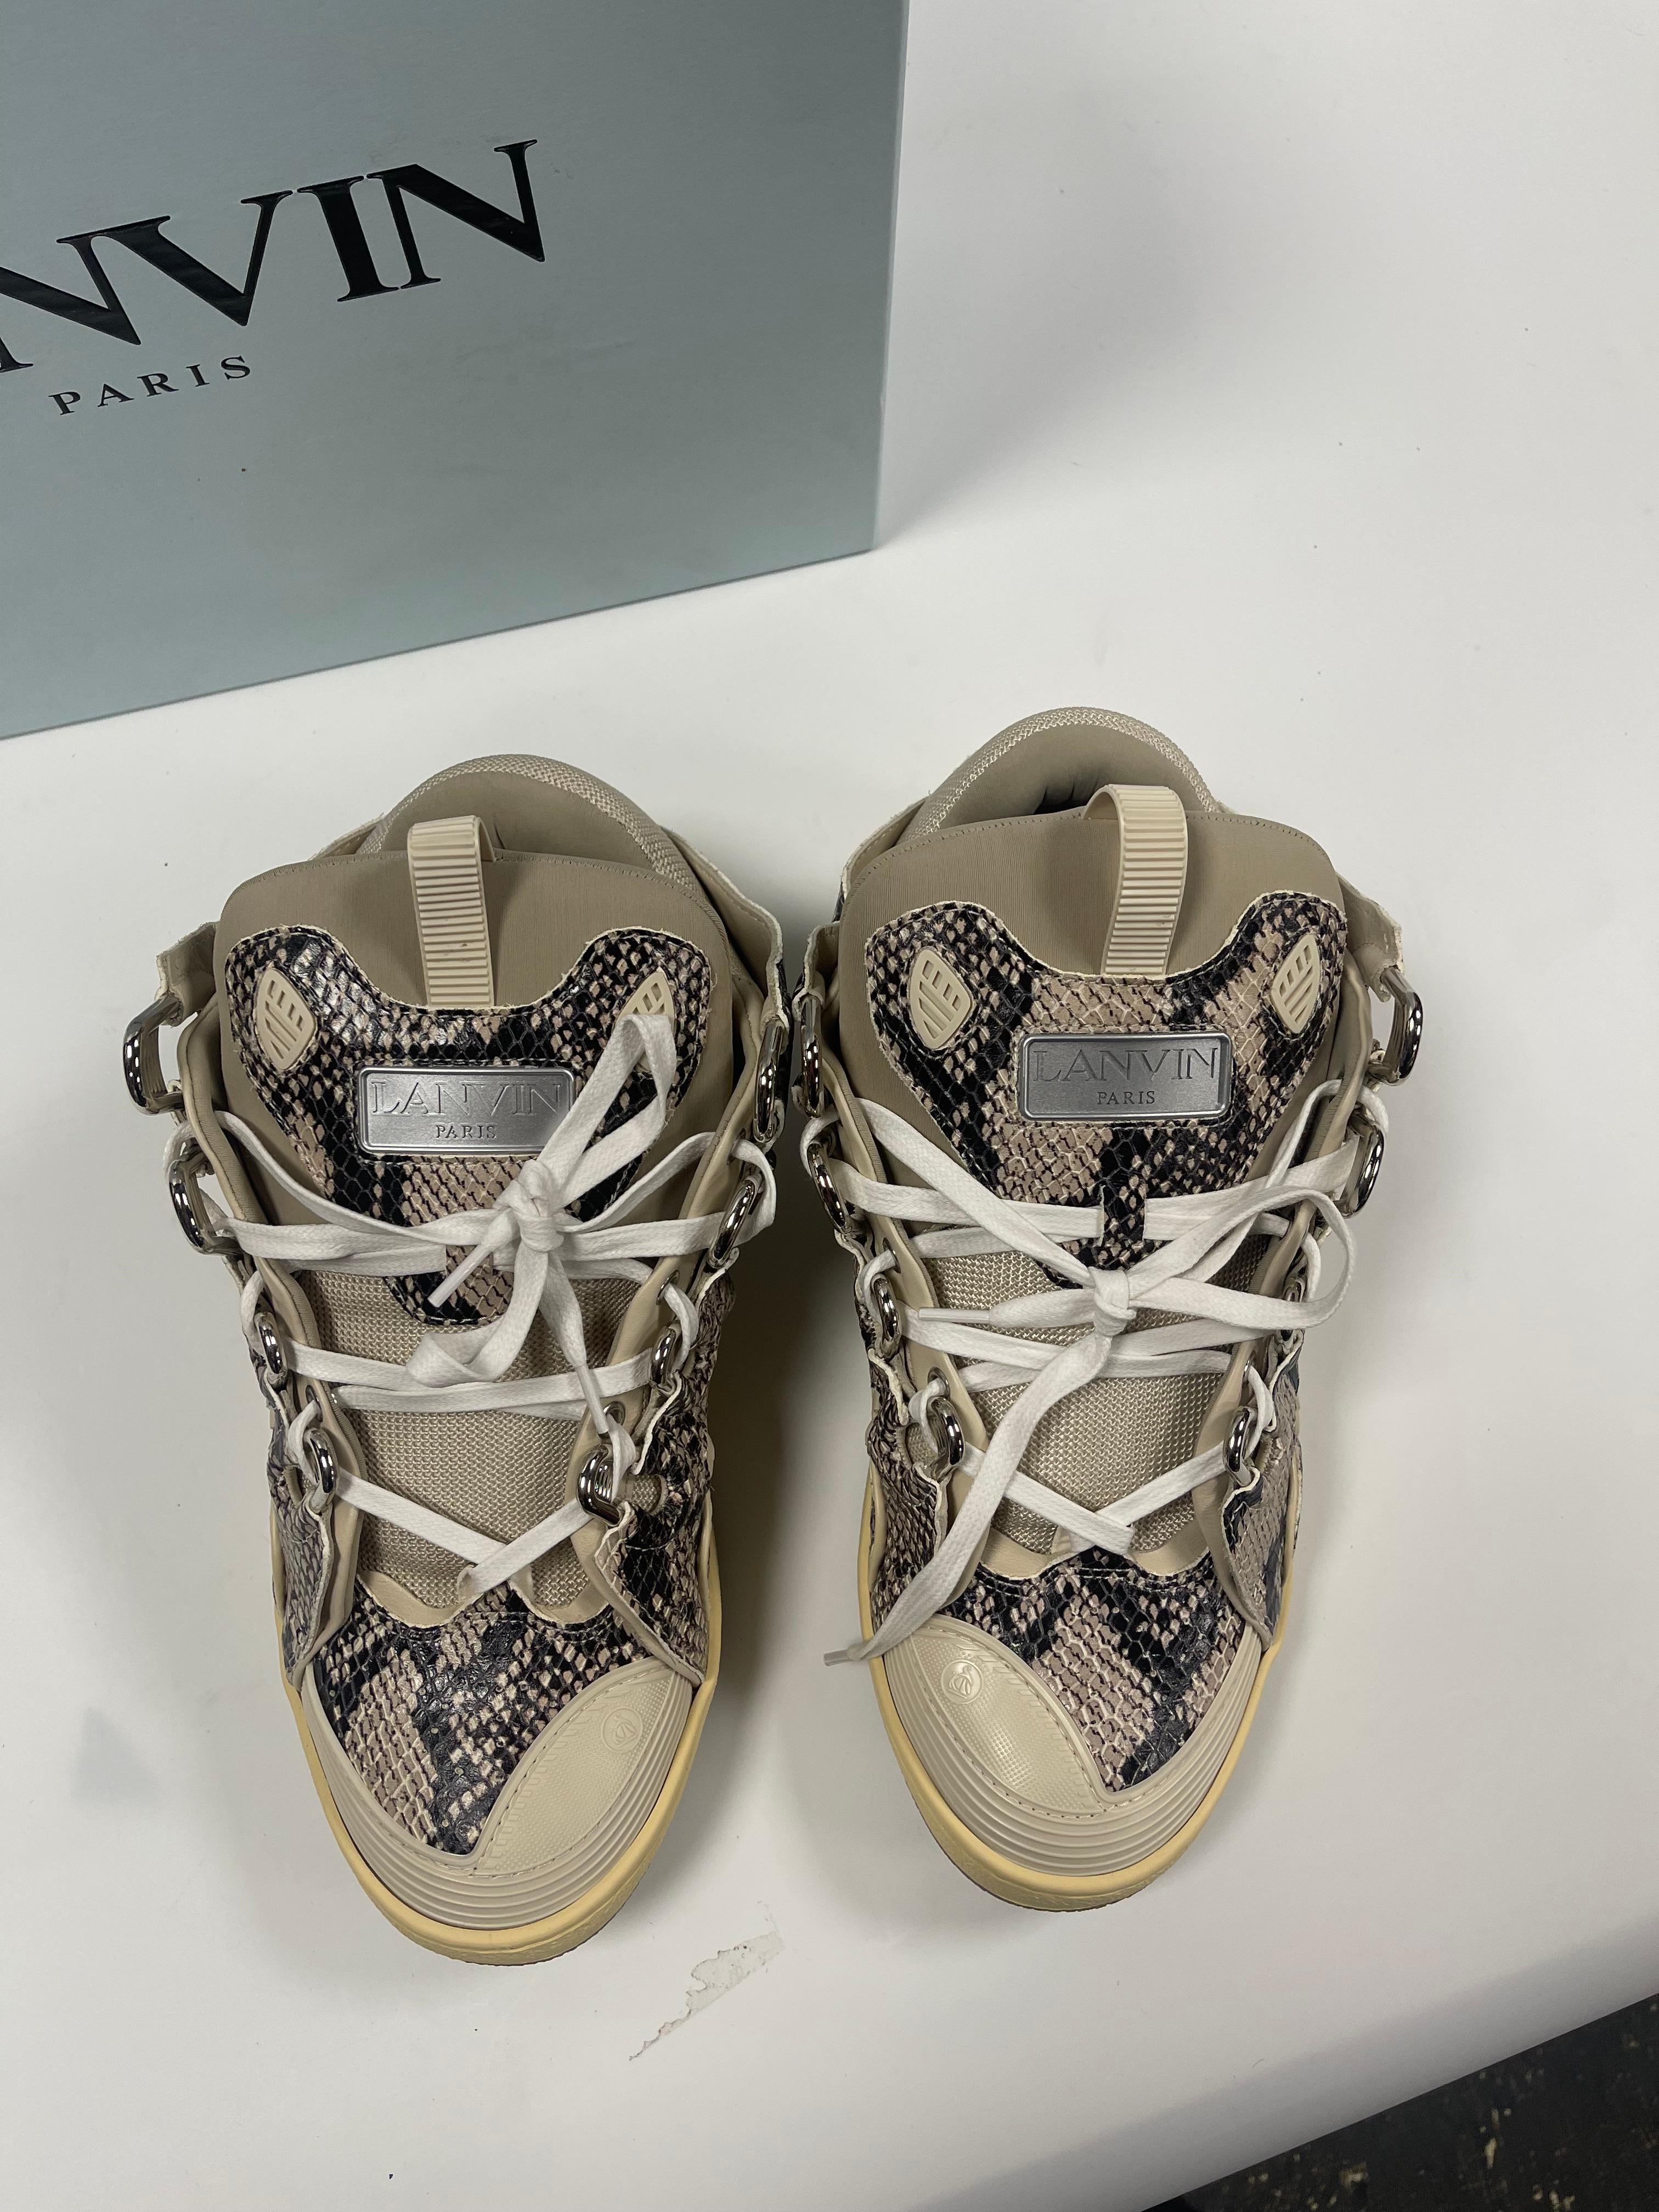 Lanvin Python Pattern Curb Men Sneakers In Excellent Condition For Sale In Montreal, Quebec